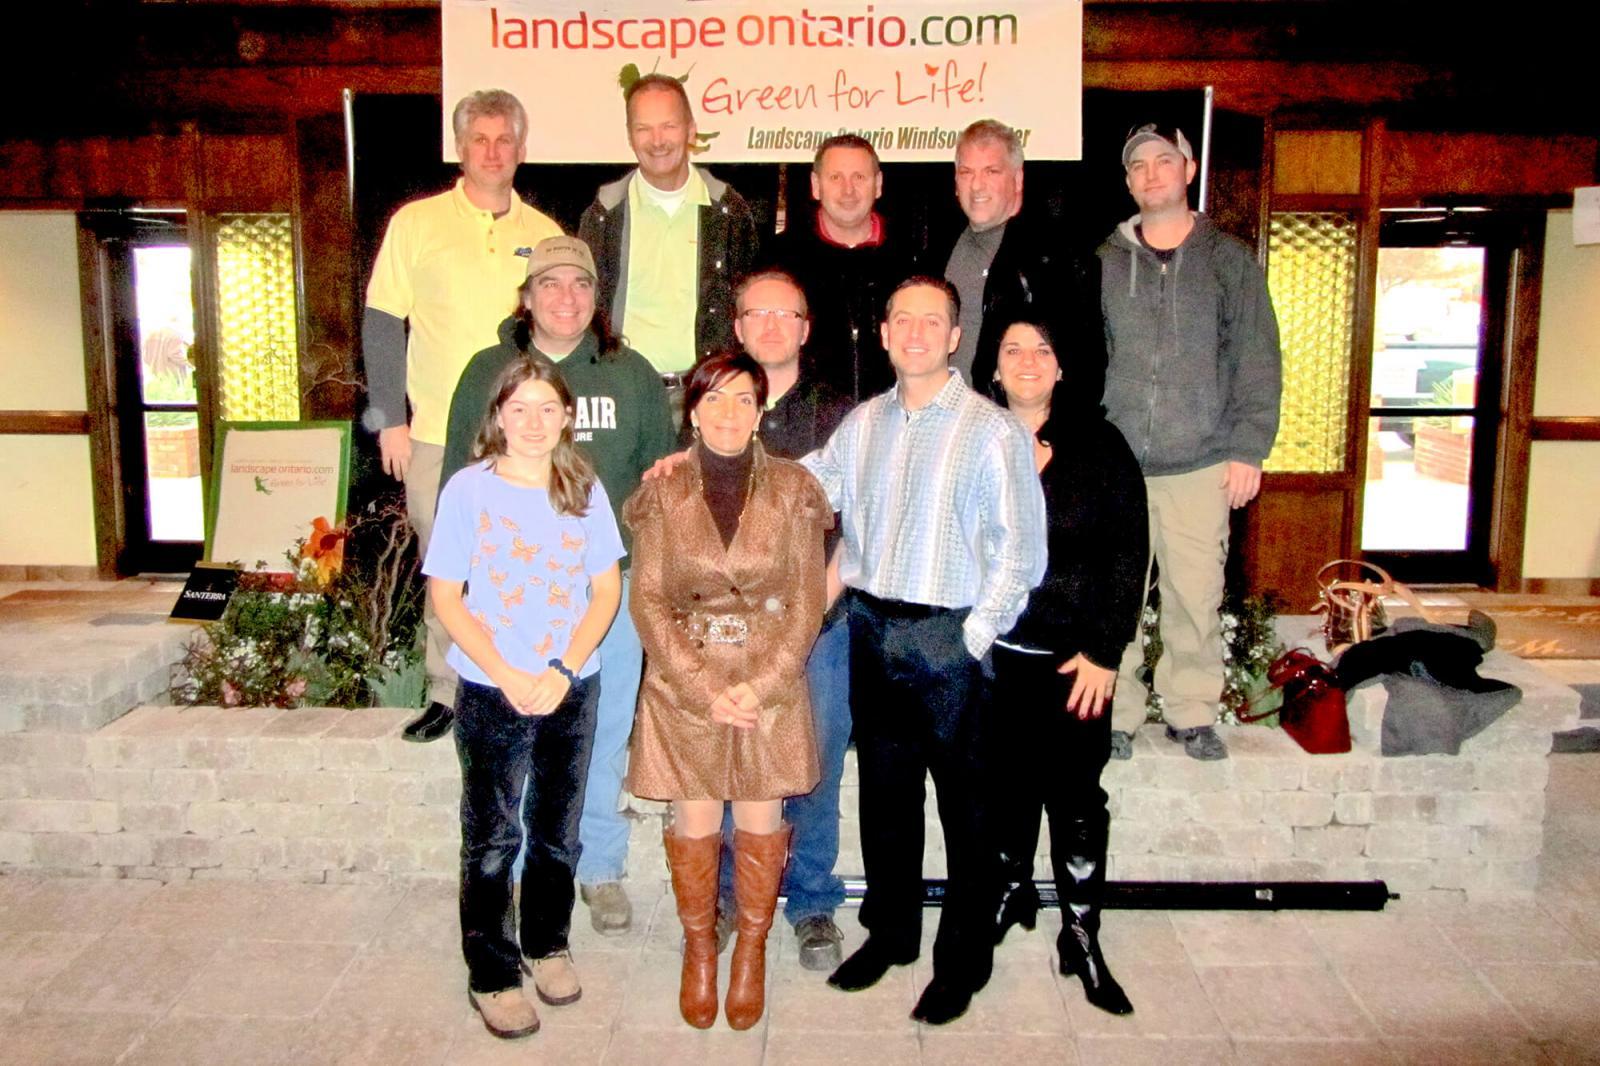 Some of the Windsor Chapter members took a break at the annual Windsor Home Show. They are in front, from left, Nicole Hall, Jim Martin, Kenny McEwan, Olivia Bellaire, Mike Bellaire, Jay Rivait. In back, from left, Dan Garlatti, Don Tellier, Tom Davis, Chris Power and Bob Bellaire.